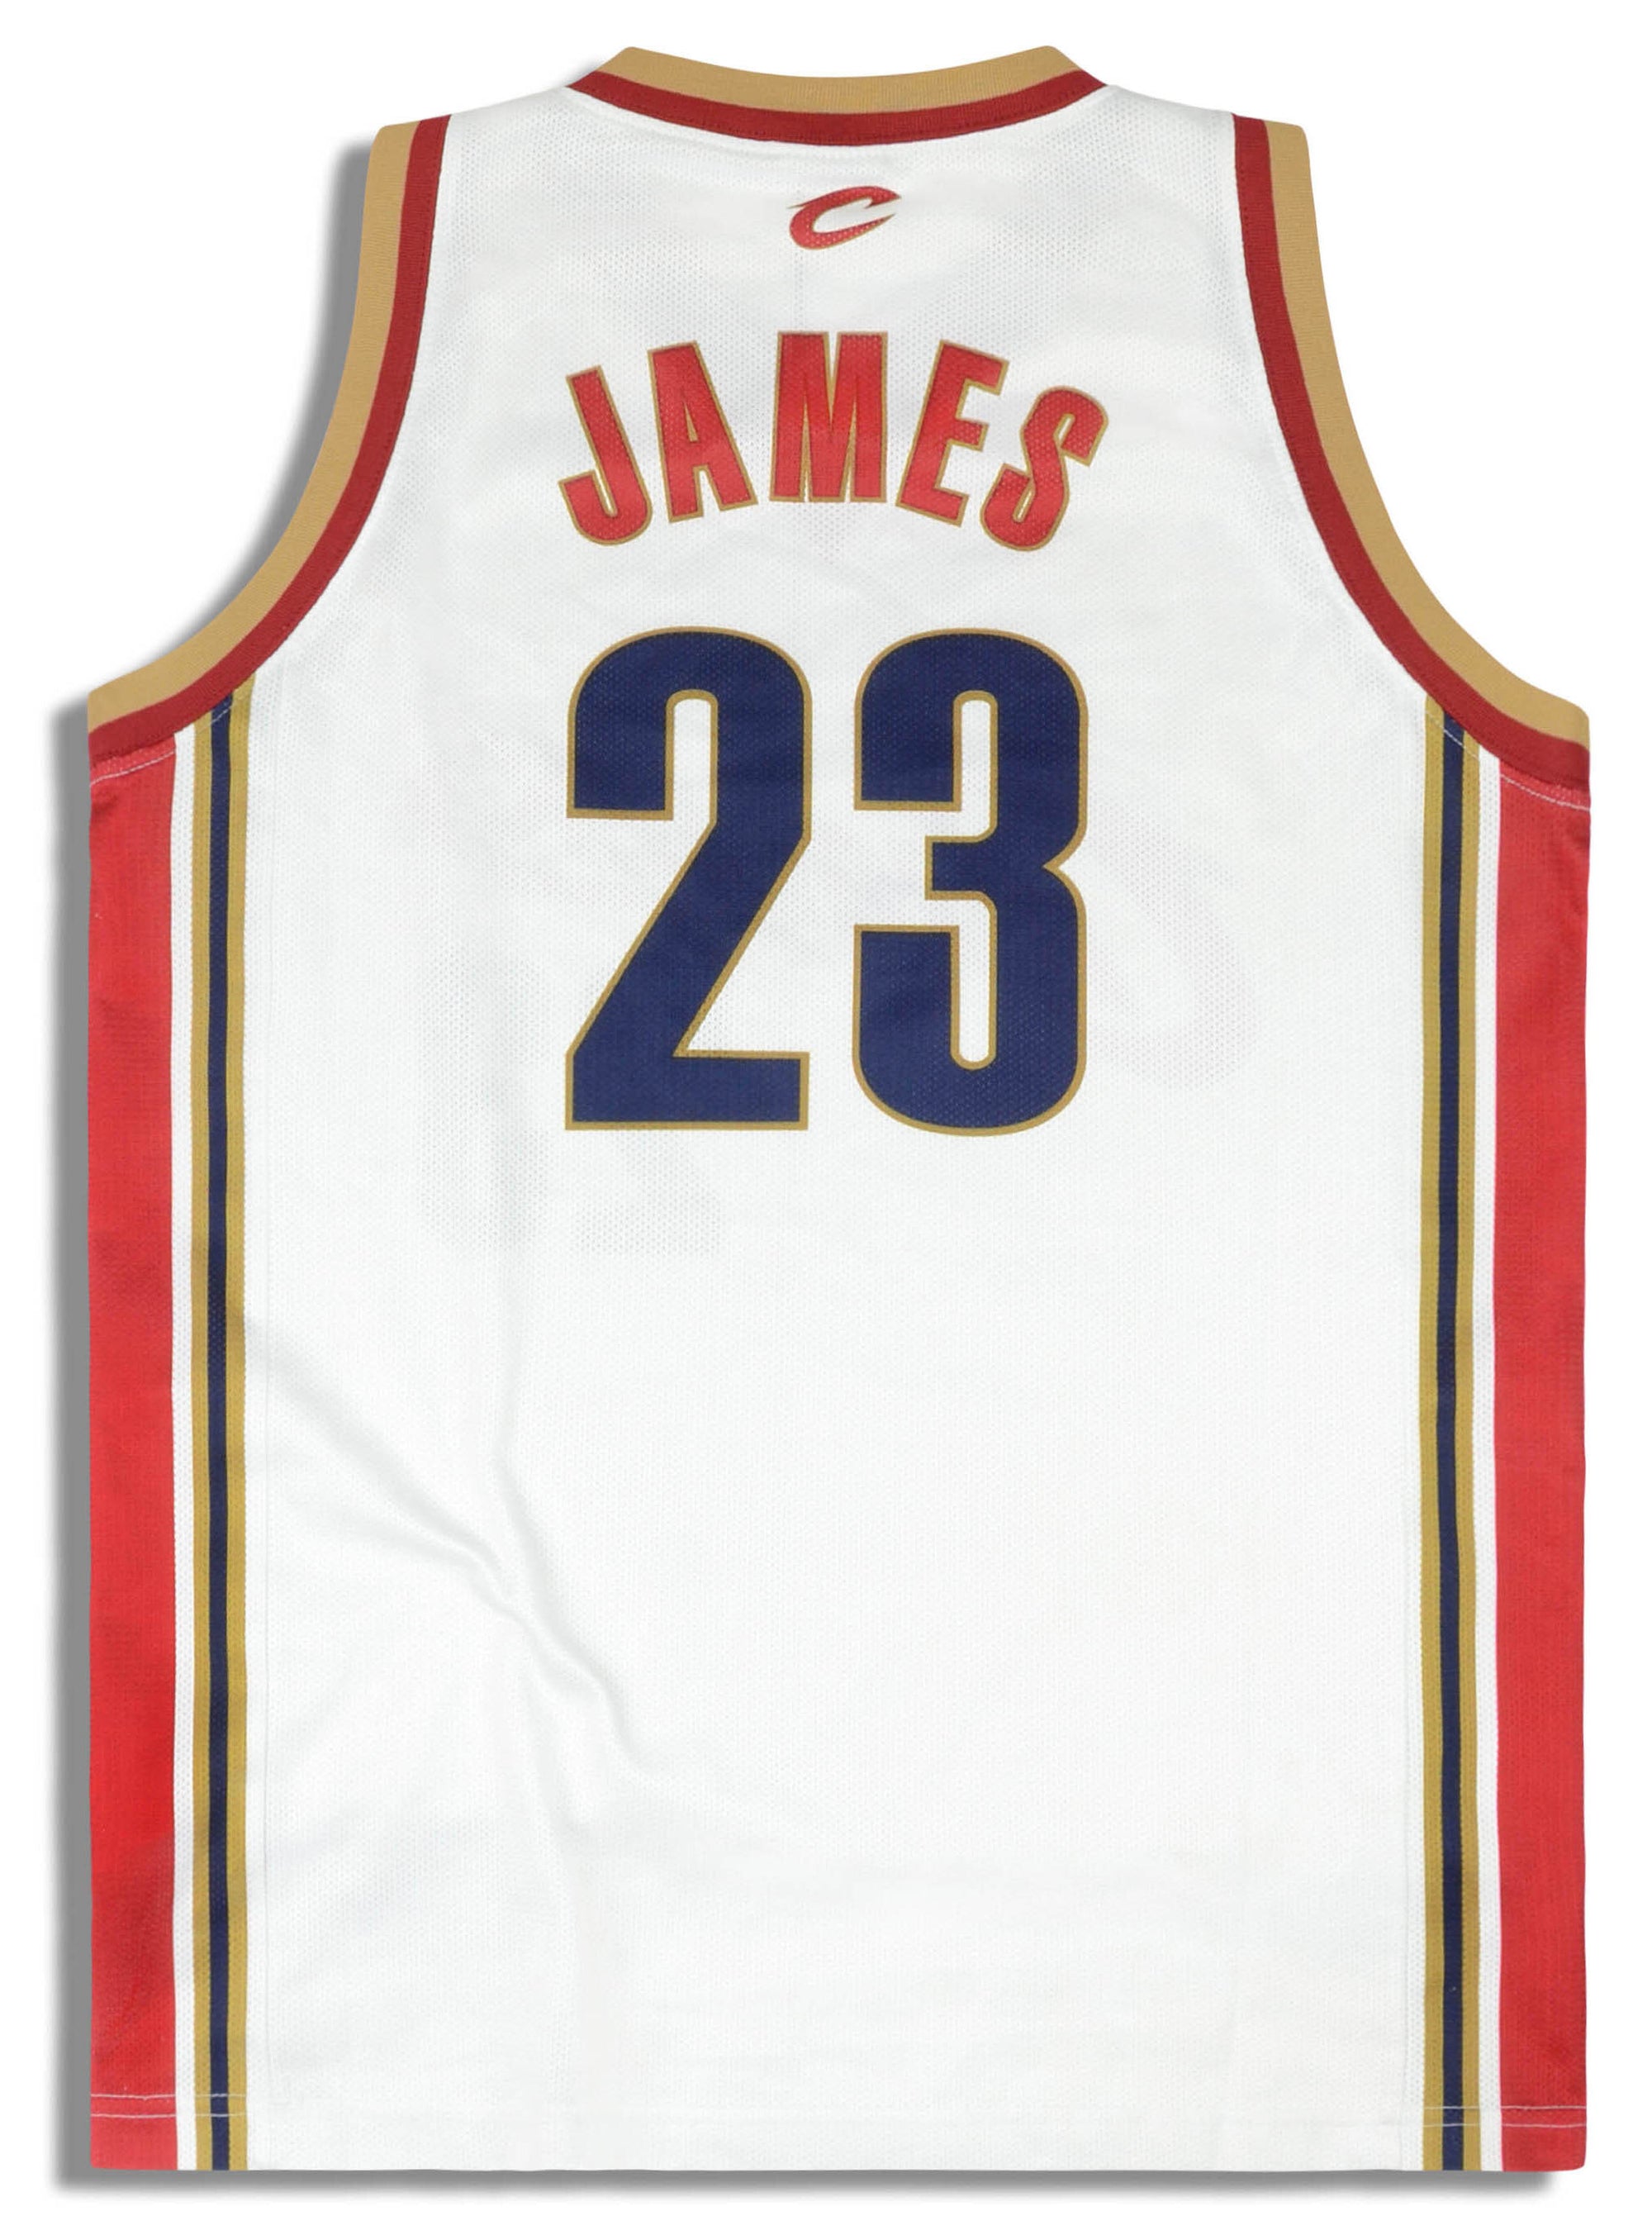 2003-10 CLEVELAND CAVALIERS JAMES #23 CHAMPION JERSEY (HOME) S